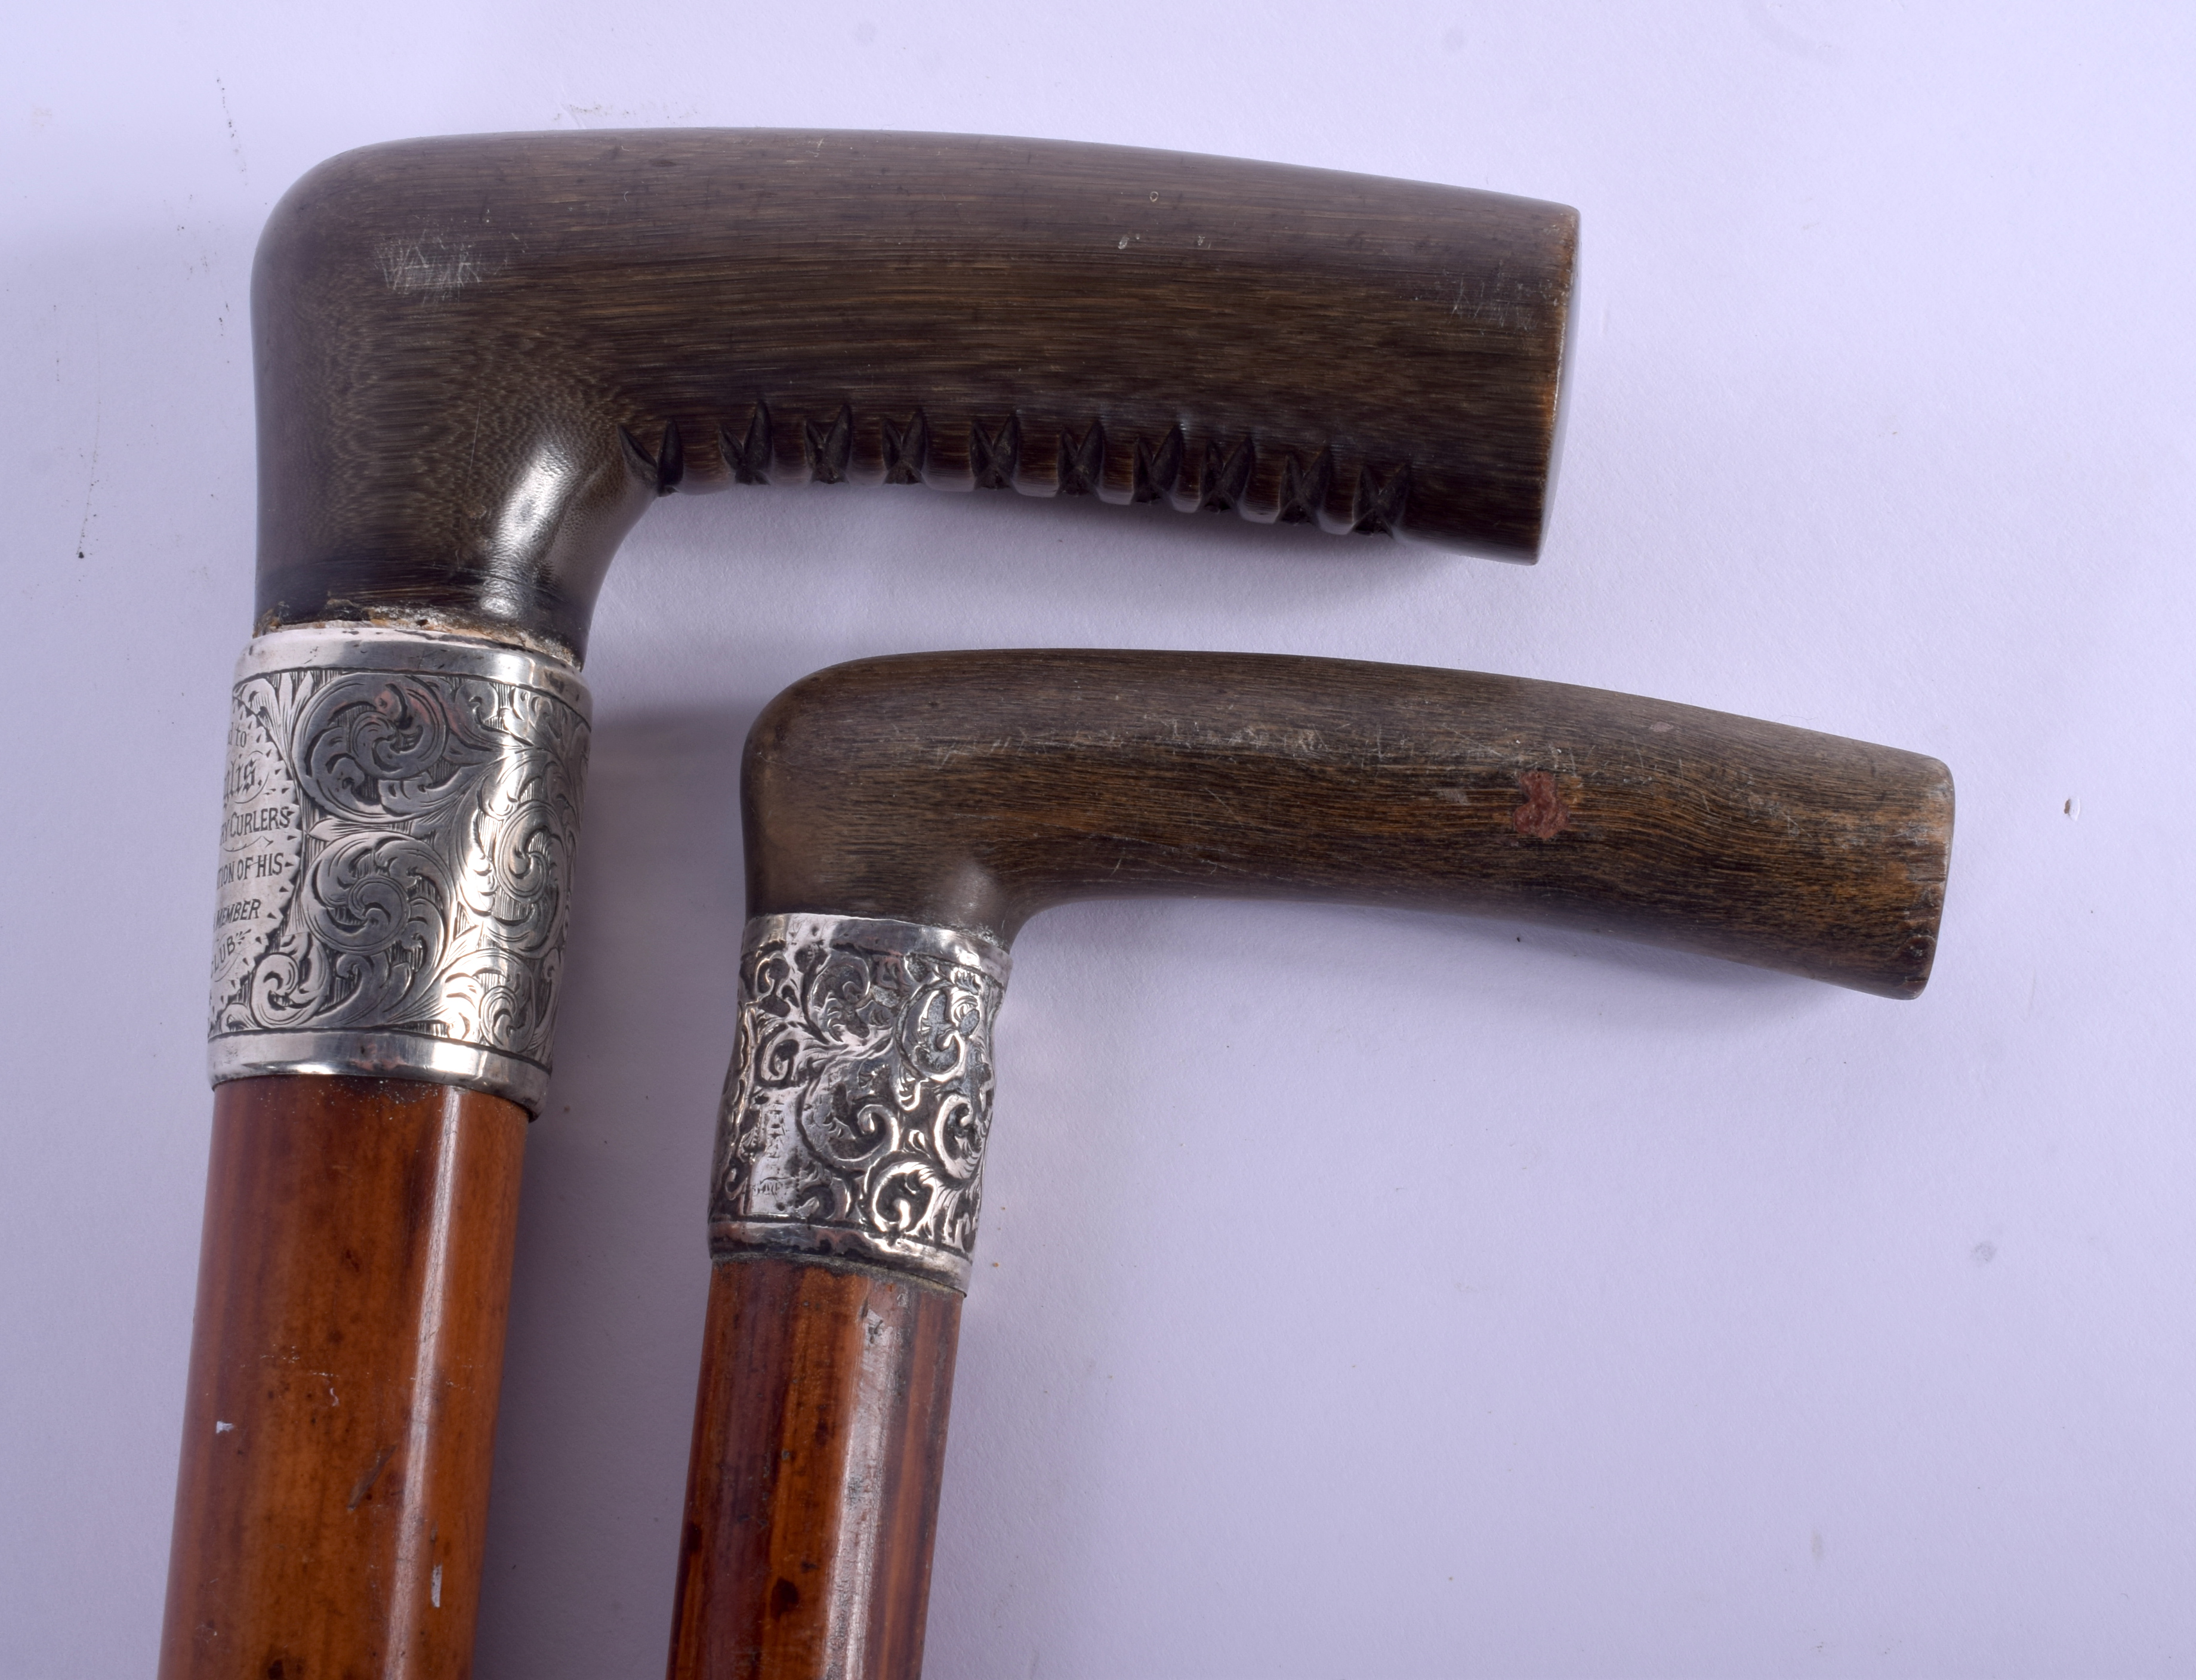 TWO 19TH CENTURY CONTINENTAL CARVED RHINOCEROS HORN HANDLED WALKING CANES. 88 cm long. (2) - Image 2 of 3